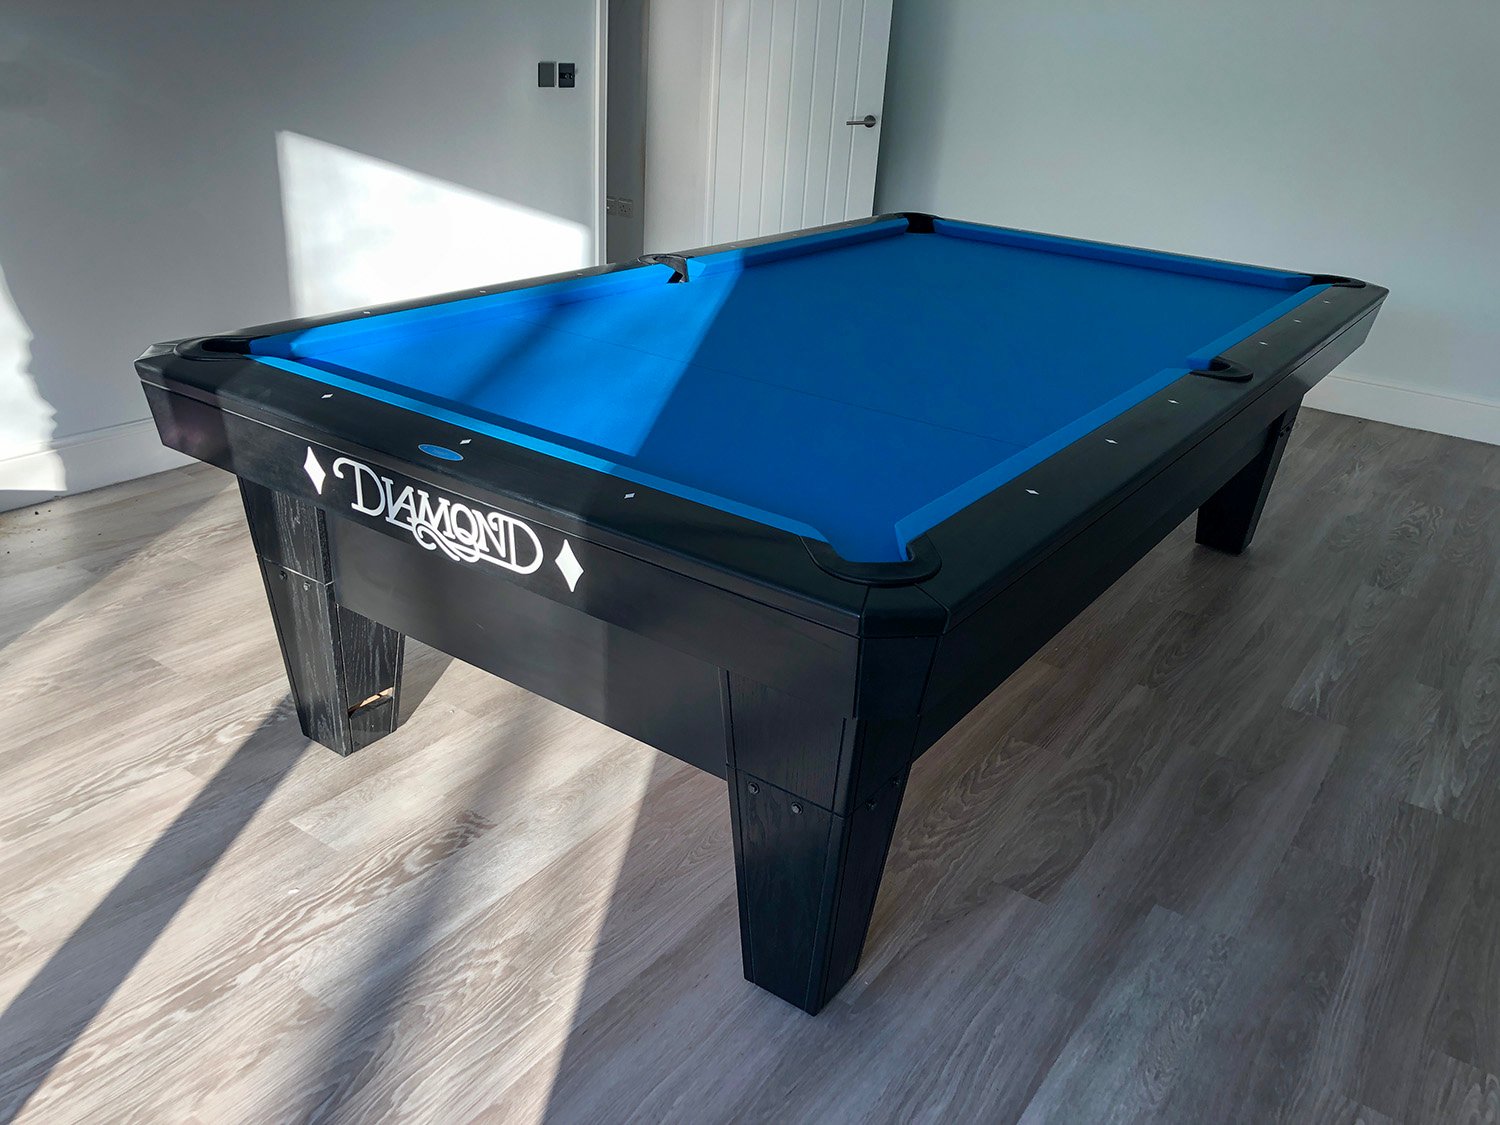 Diamond Pool Table Prices - How do you Price a Switches?